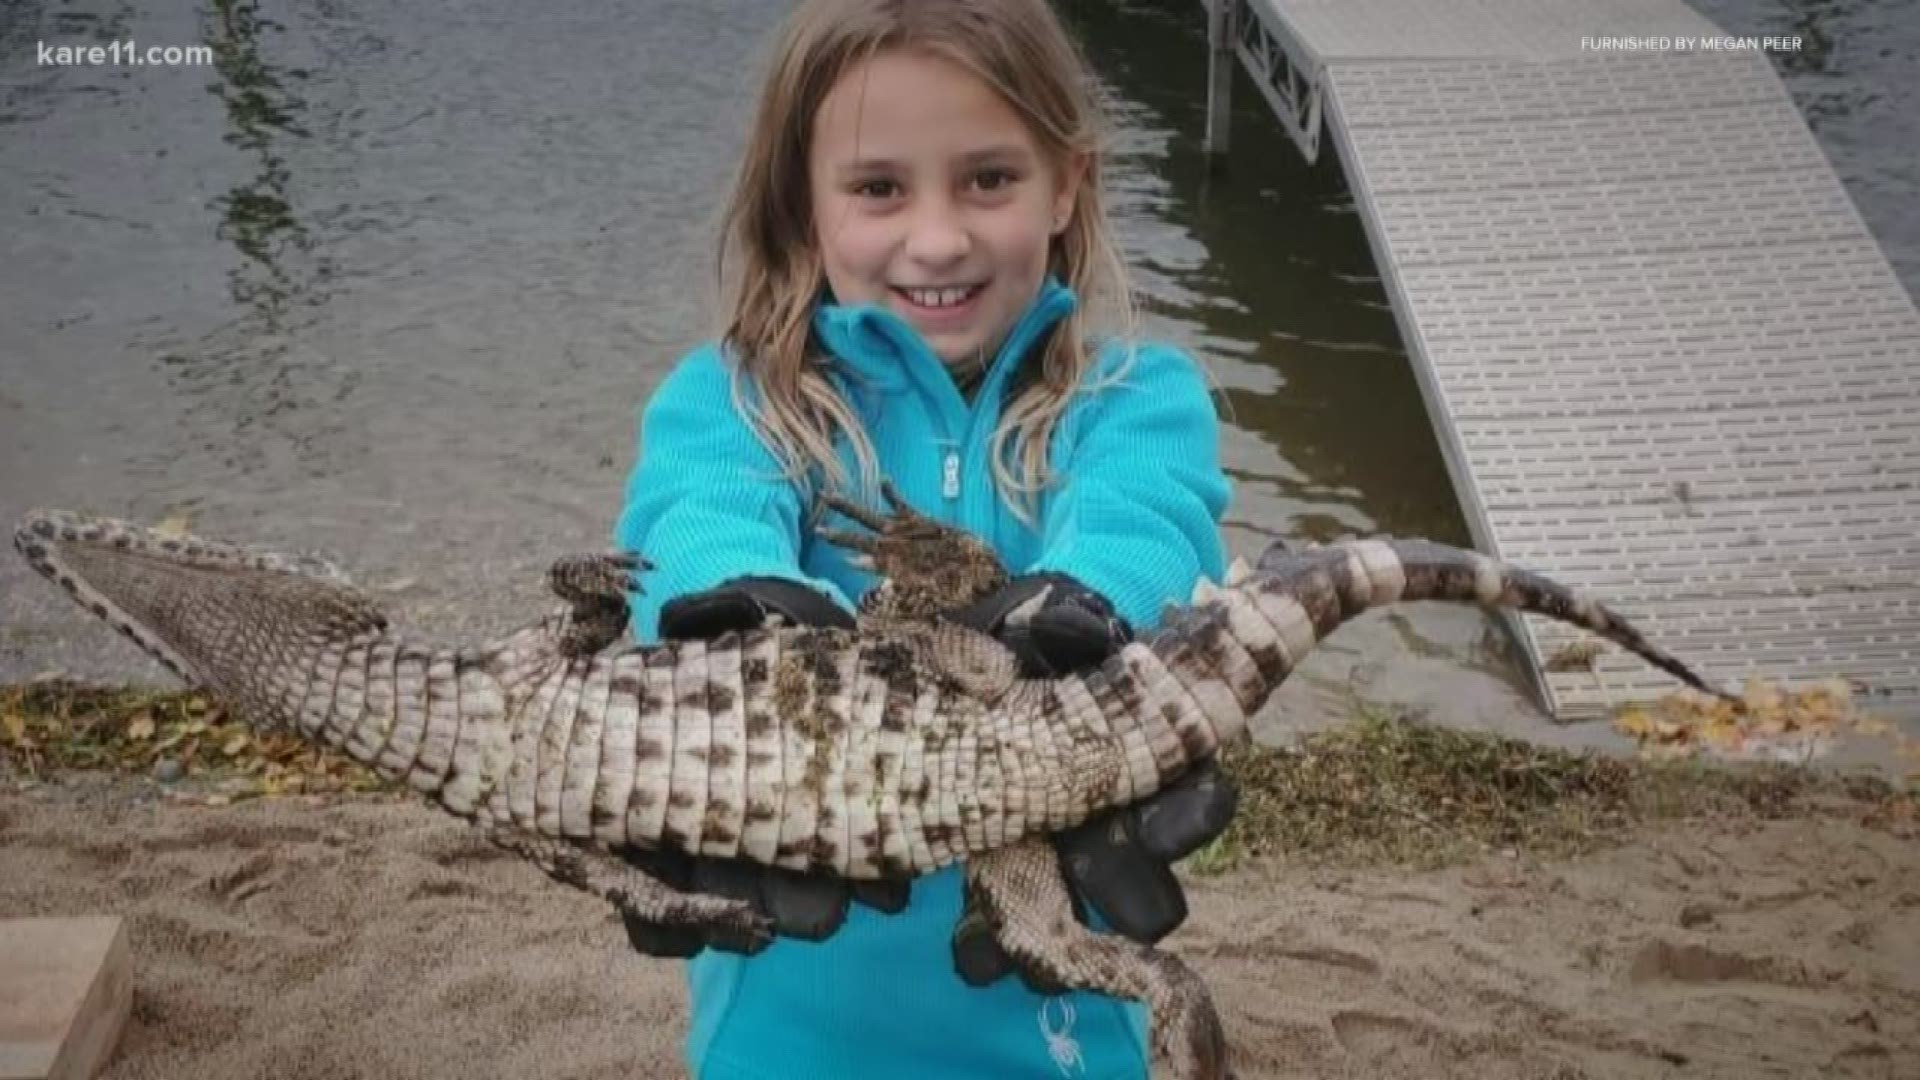 9-year-old Quinlynn Lehrmann spotted the 27-inch gator earlier this month.